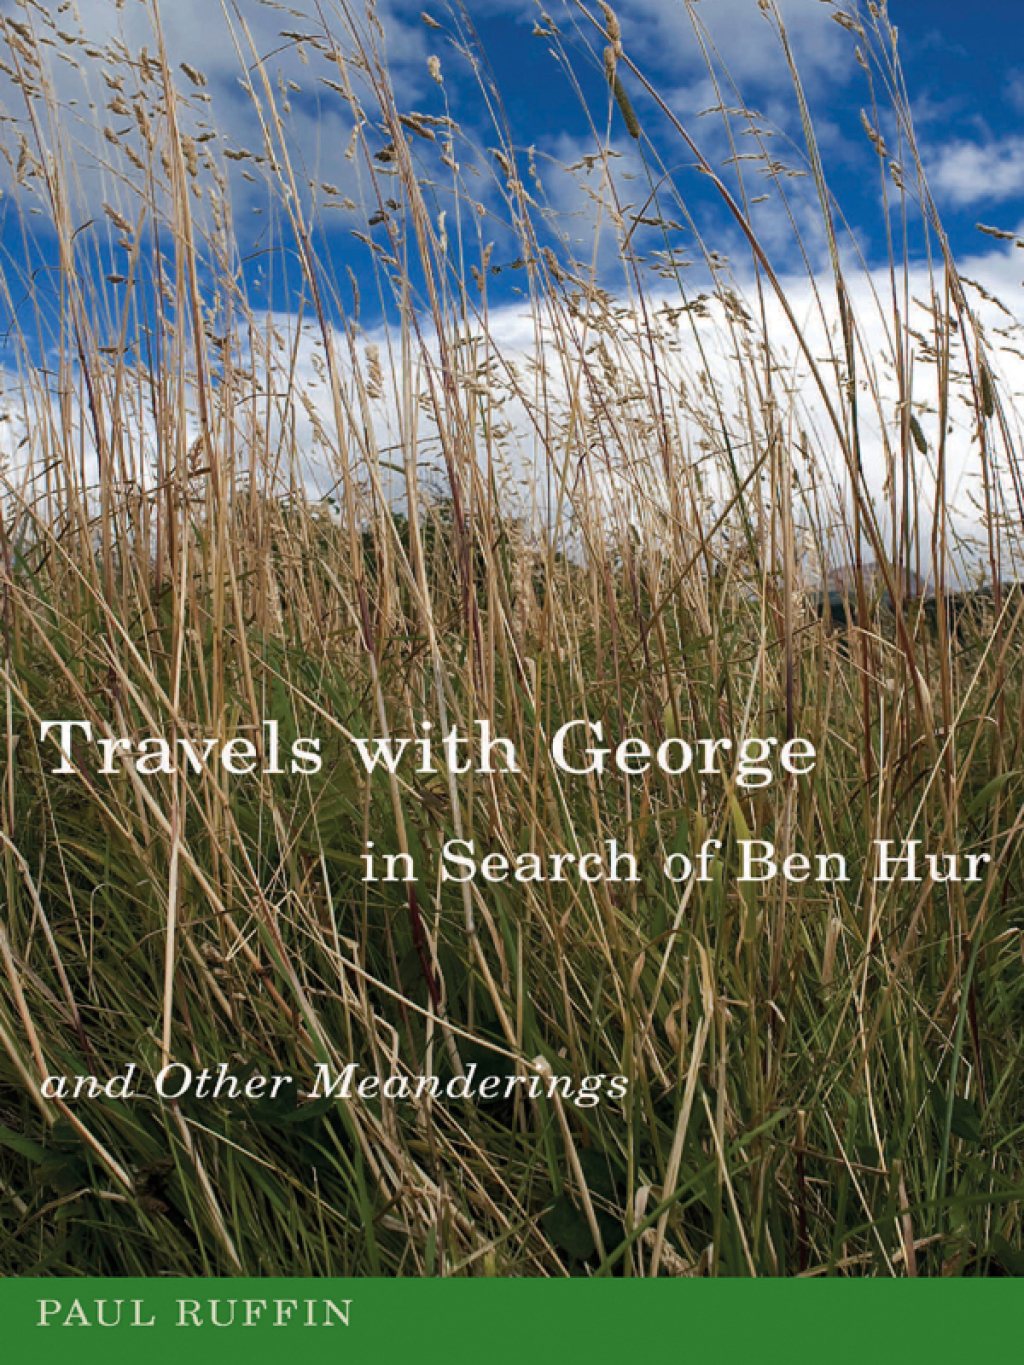 Travels with George  in Search of Ben Hur and Other Meanderings (eBook) - Paul Ruffin,